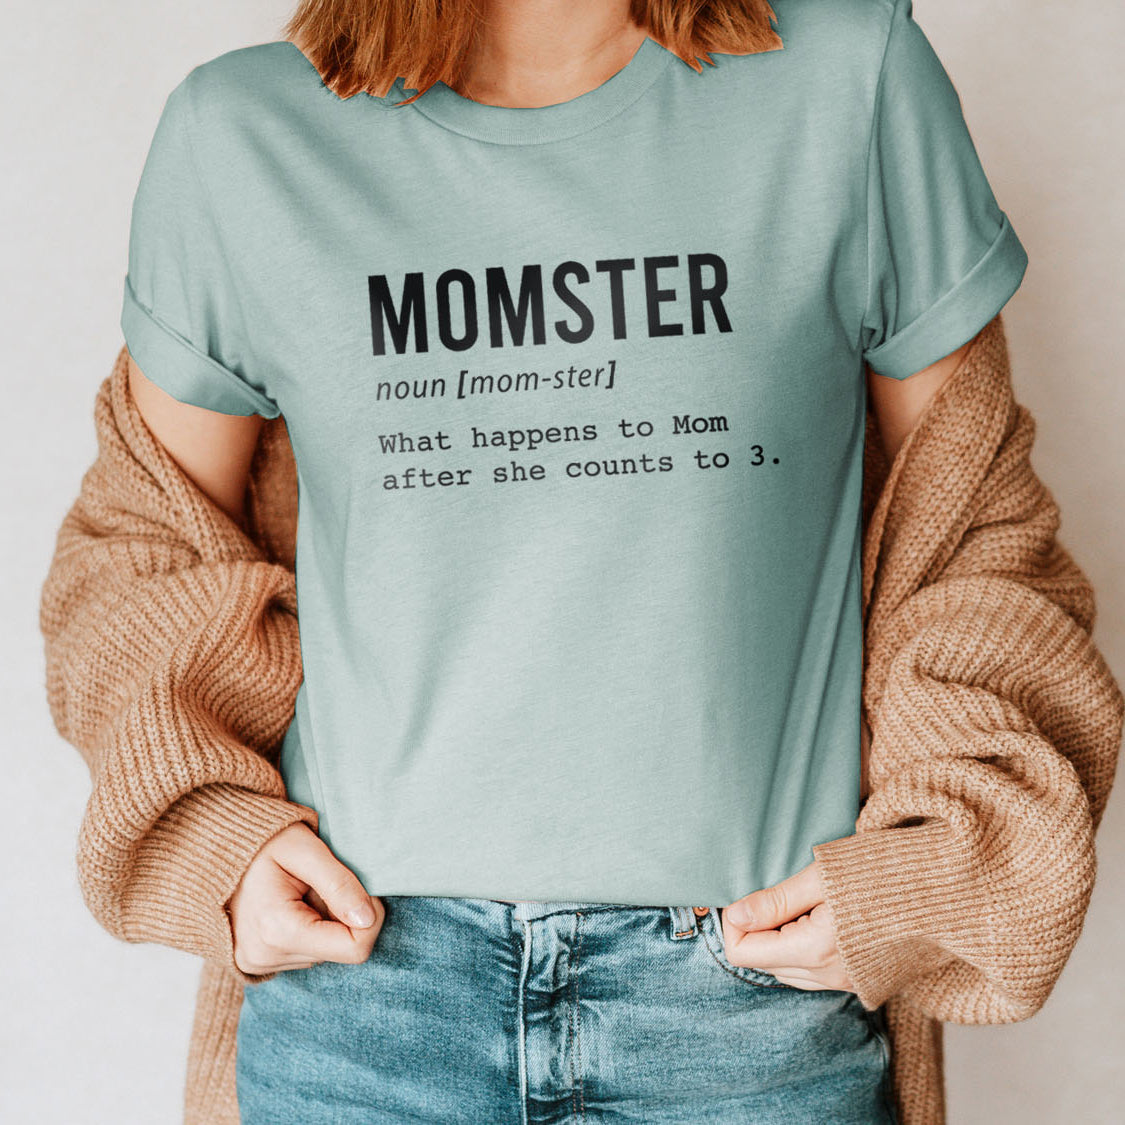 Funny Definition of Momster T-shirt - Funny Family Retro Vintage Design Printed Tee Shirt